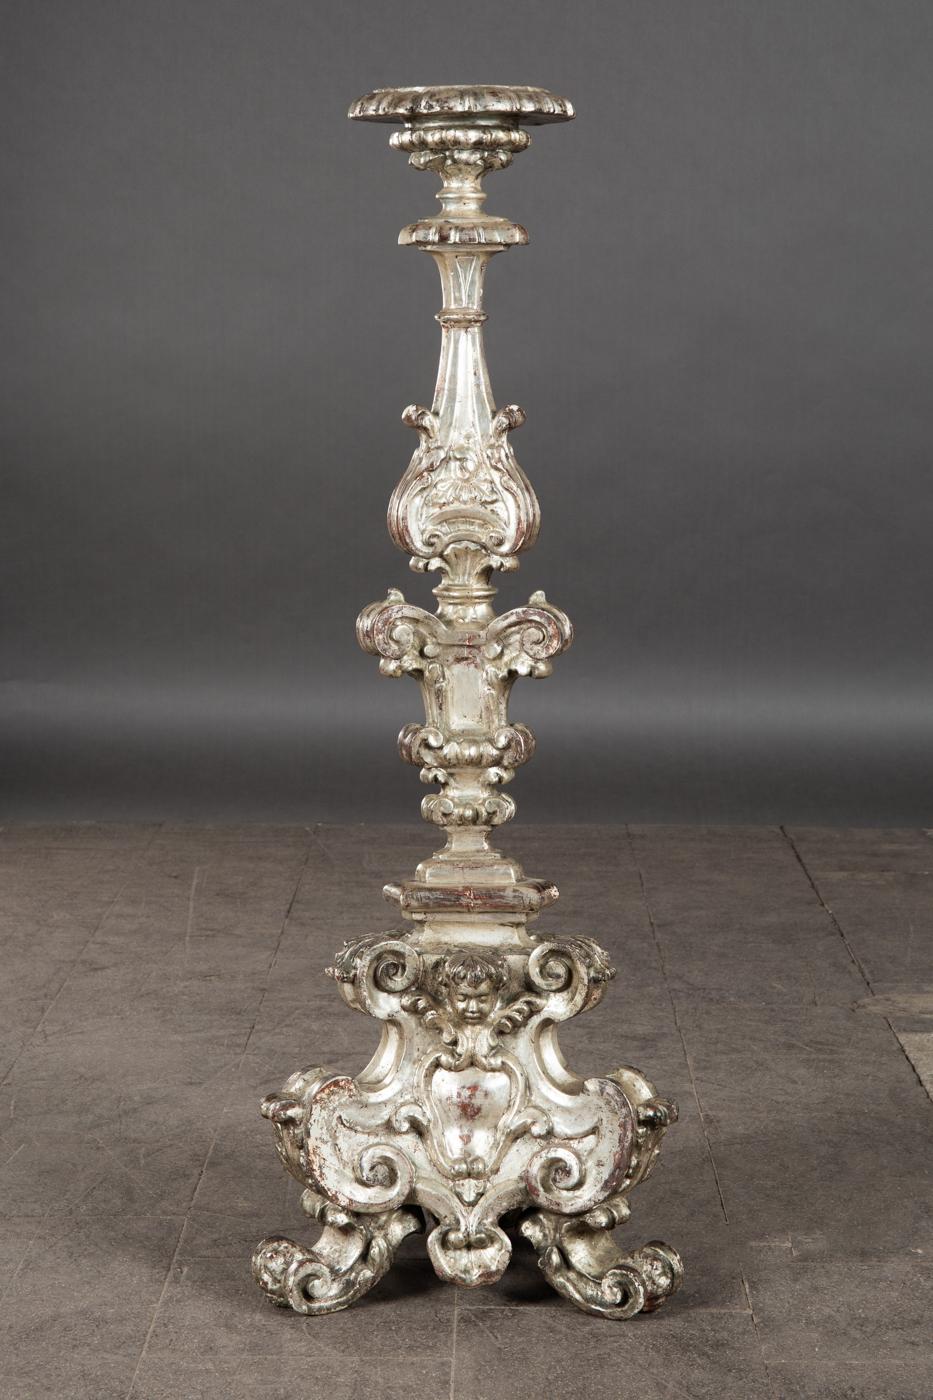 Candlestick in baroque style, wood made of gilded wood with baroque baluster shaft and three-pass jointed base with volutes, provided with a burning point, H. 102.5cm, D. 37cm, age-related wear and tear as well as some lacquer abrasion, iron thorn